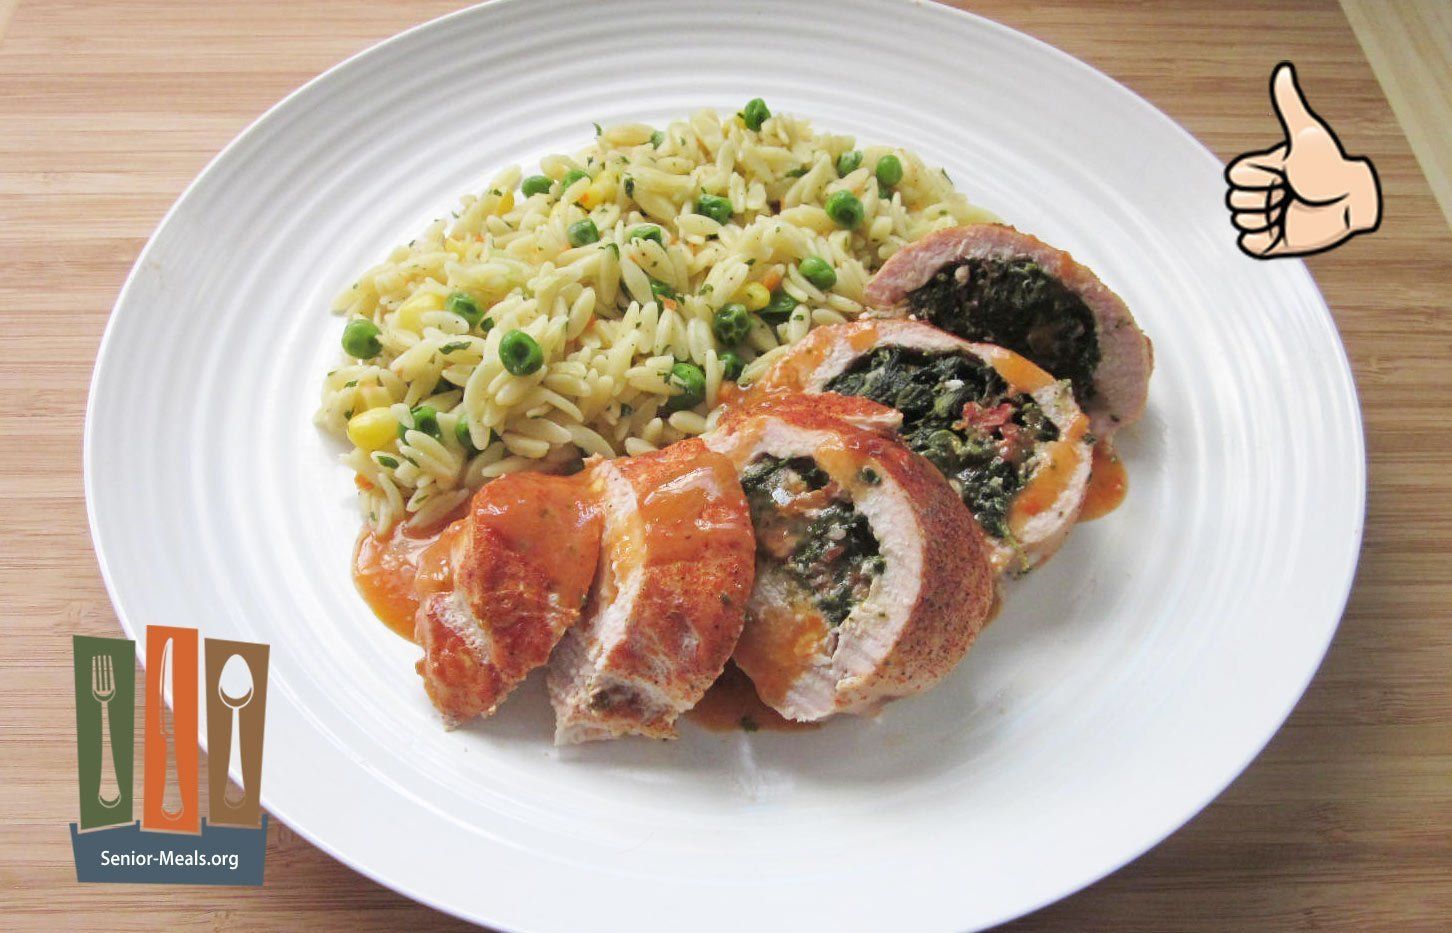 Tuscan Style Stuffed Chicken Breast with Rice Pilaf